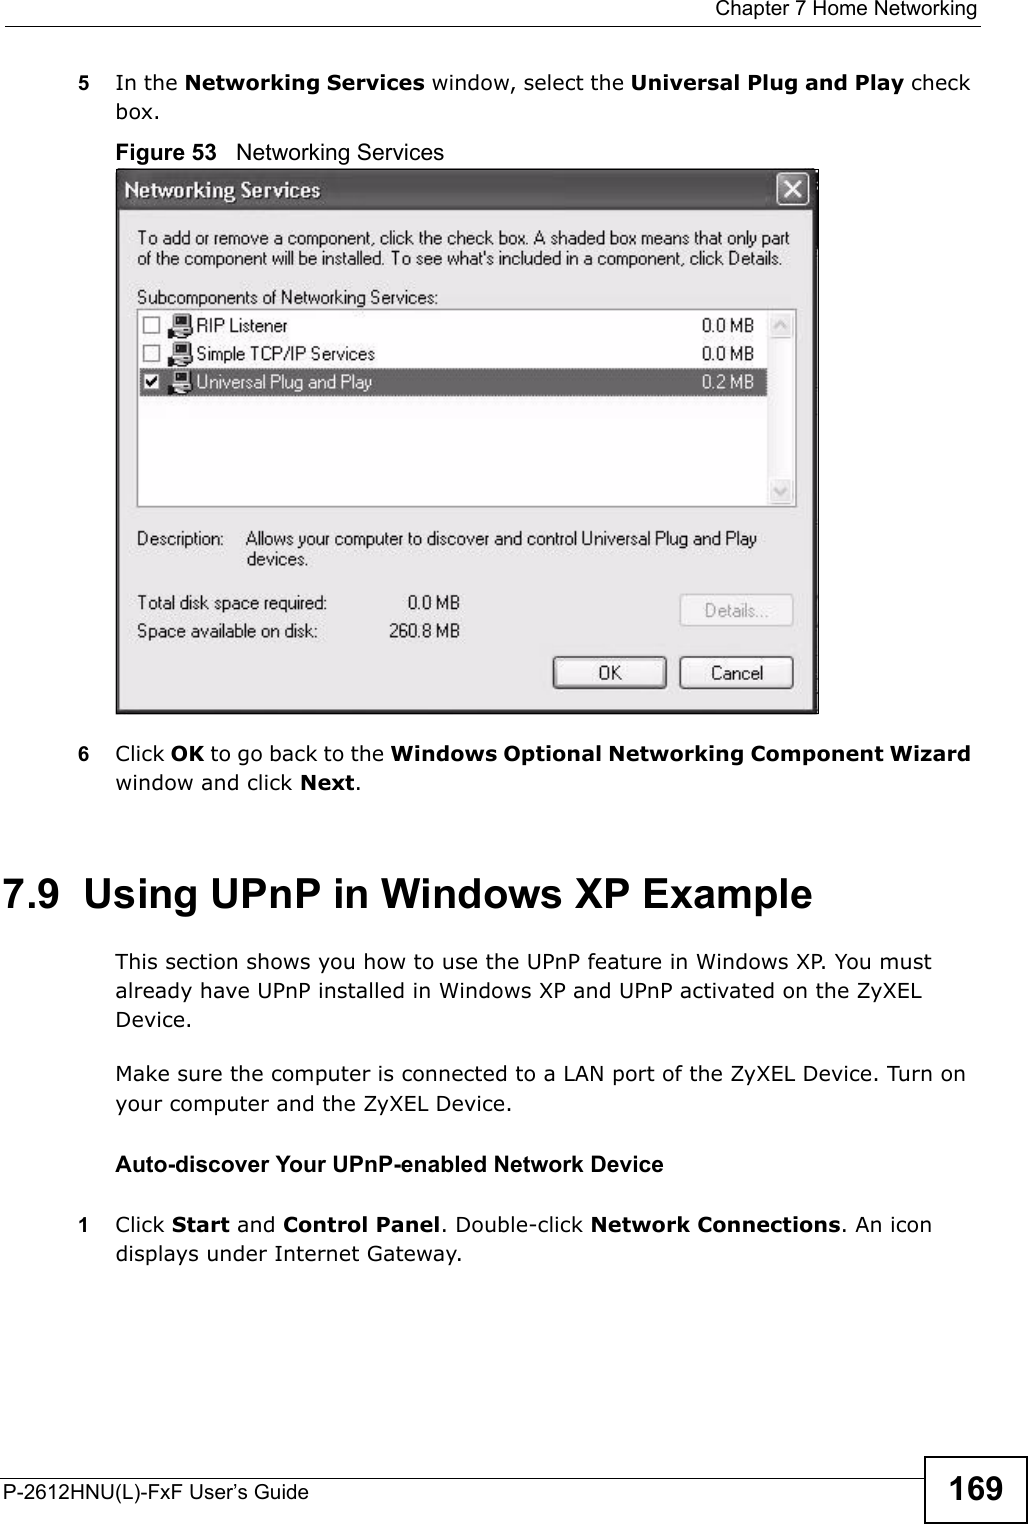  Chapter 7 Home NetworkingP-2612HNU(L)-FxF User’s Guide 1695In the Networking Services window, select the Universal Plug and Play check box.Figure 53   Networking Services6Click OK to go back to the Windows Optional Networking Component Wizardwindow and click Next. 7.9  Using UPnP in Windows XP ExampleThis section shows you how to use the UPnP feature in Windows XP. You must already have UPnP installed in Windows XP and UPnP activated on the ZyXEL Device.Make sure the computer is connected to a LAN port of the ZyXEL Device. Turn on your computer and the ZyXEL Device. Auto-discover Your UPnP-enabled Network Device1Click Start and Control Panel. Double-click Network Connections. An icondisplays under Internet Gateway.